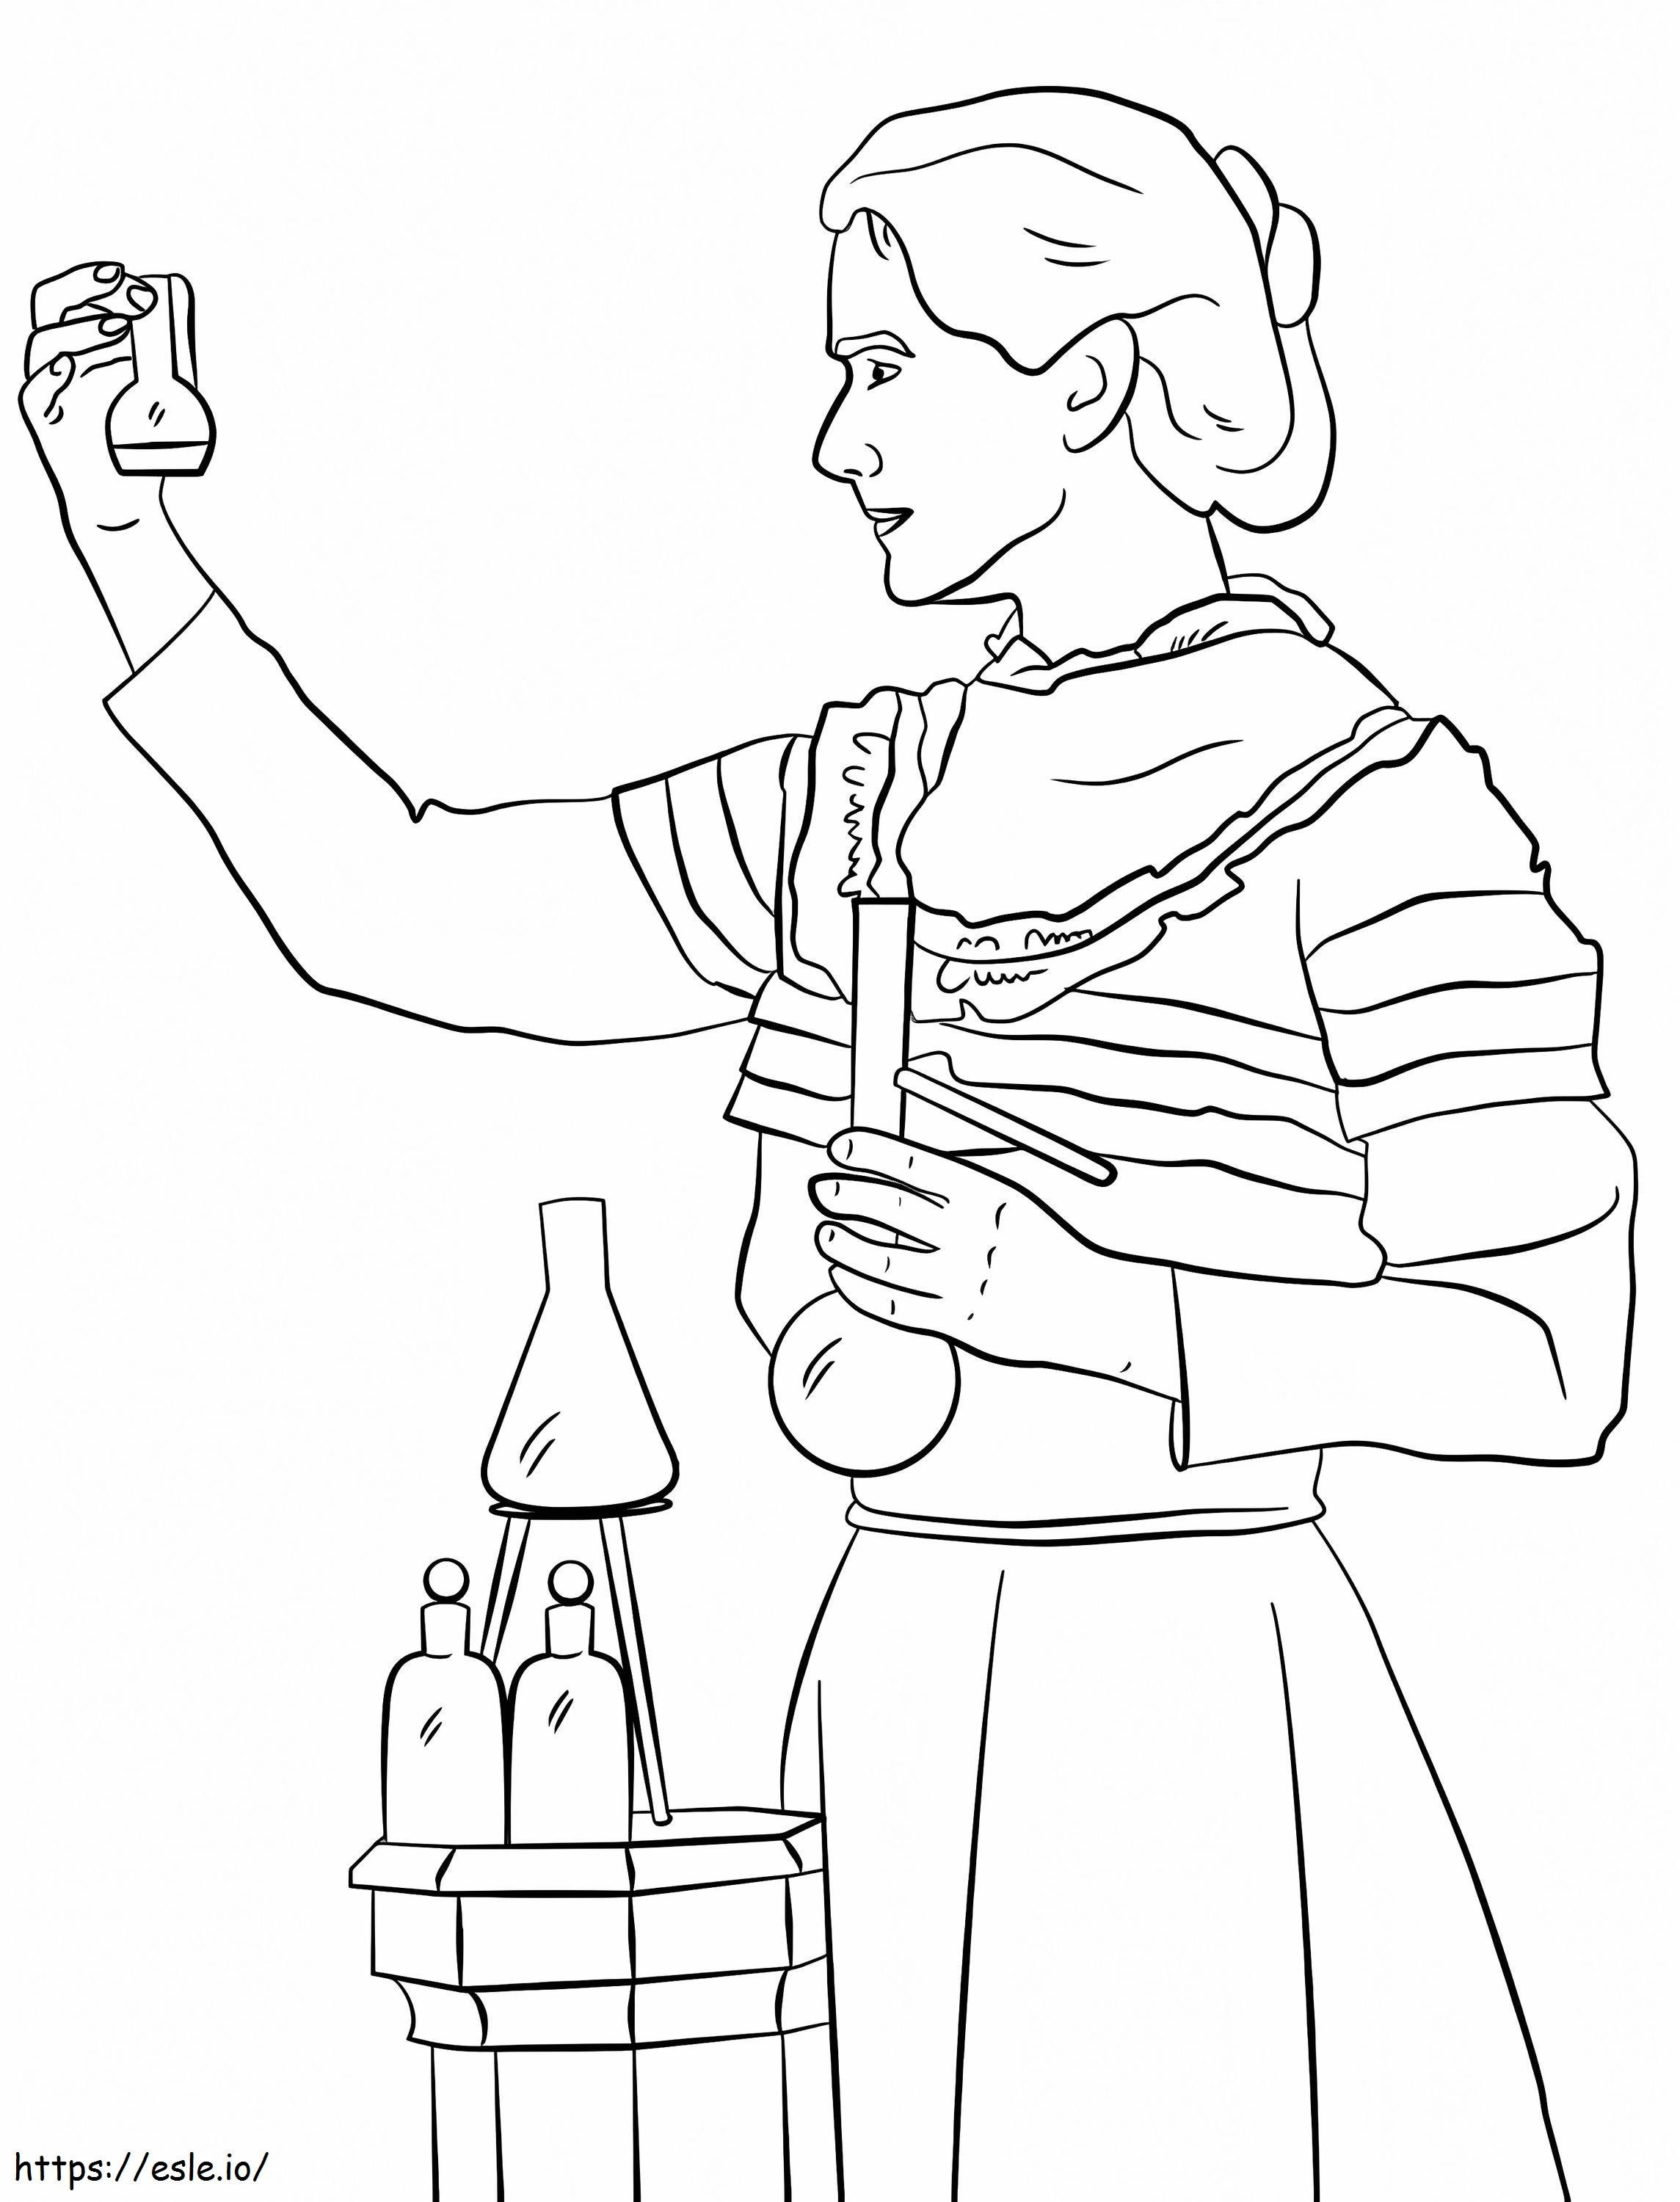 Marie Curie coloring page